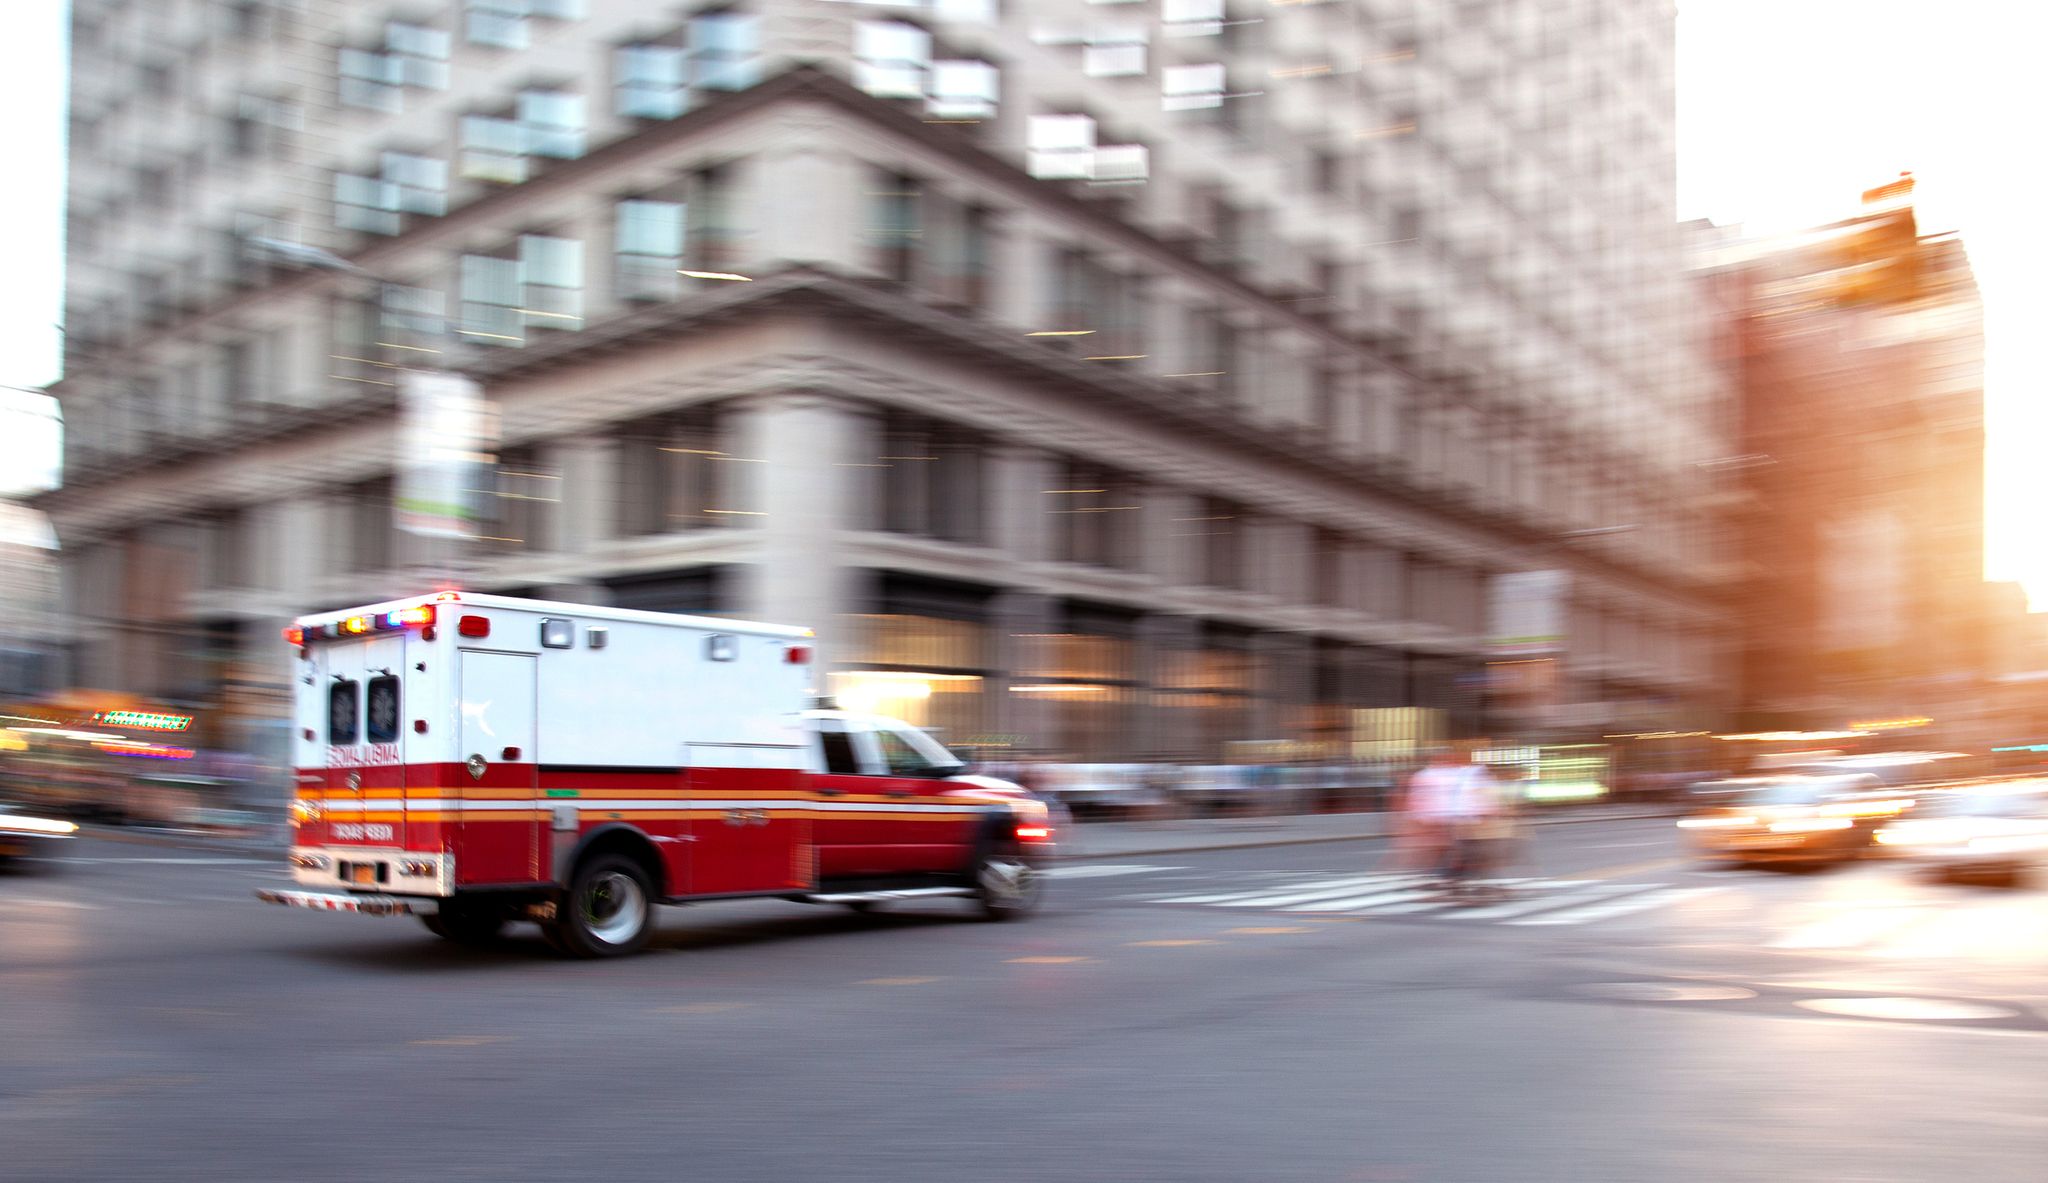 Ambulance responding to an emergency | Photo: Getty Images 